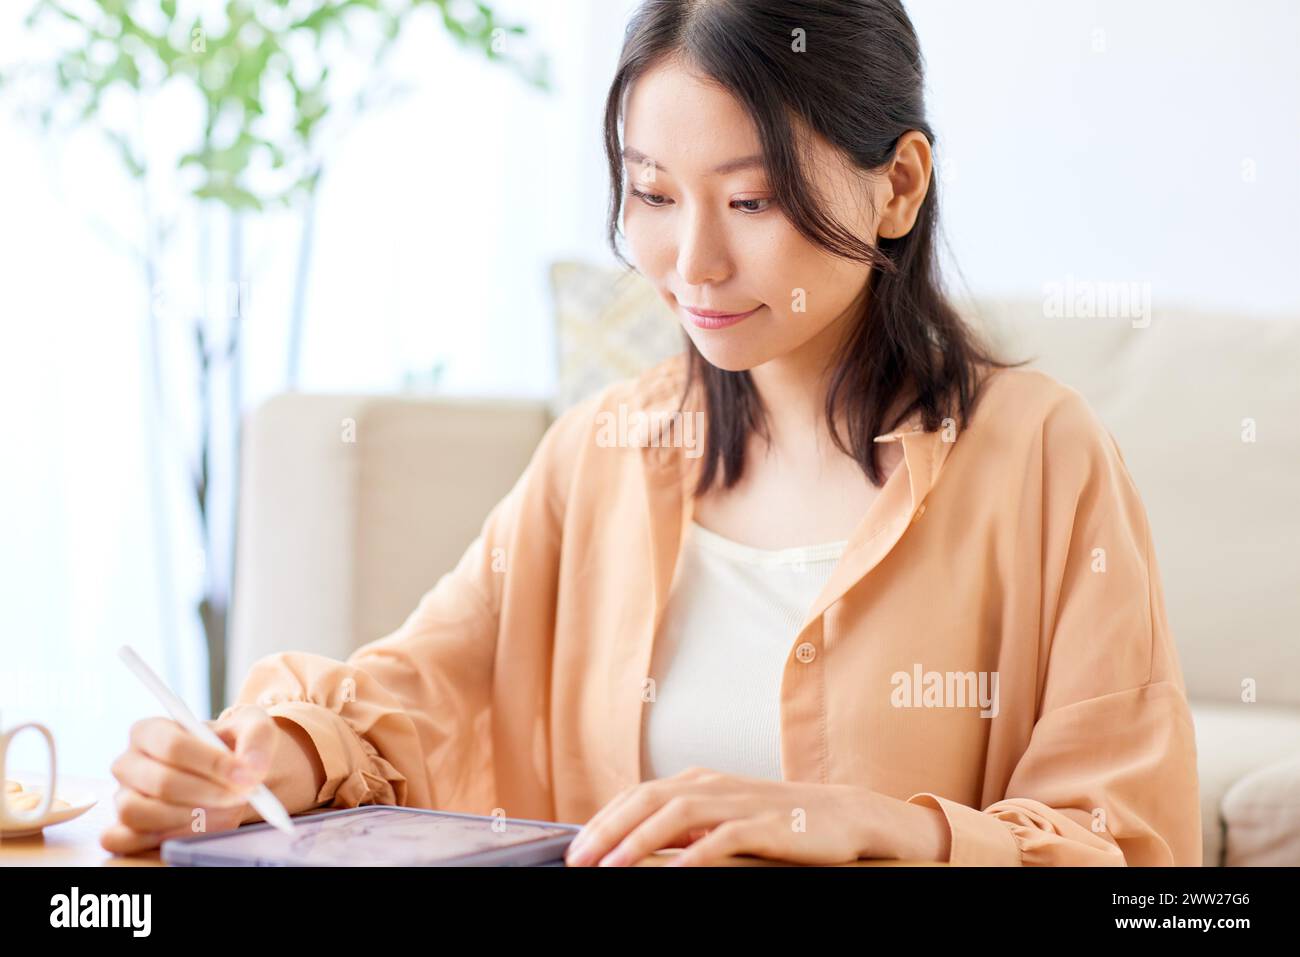 Asian woman writing on tablet while sitting at table Stock Photo